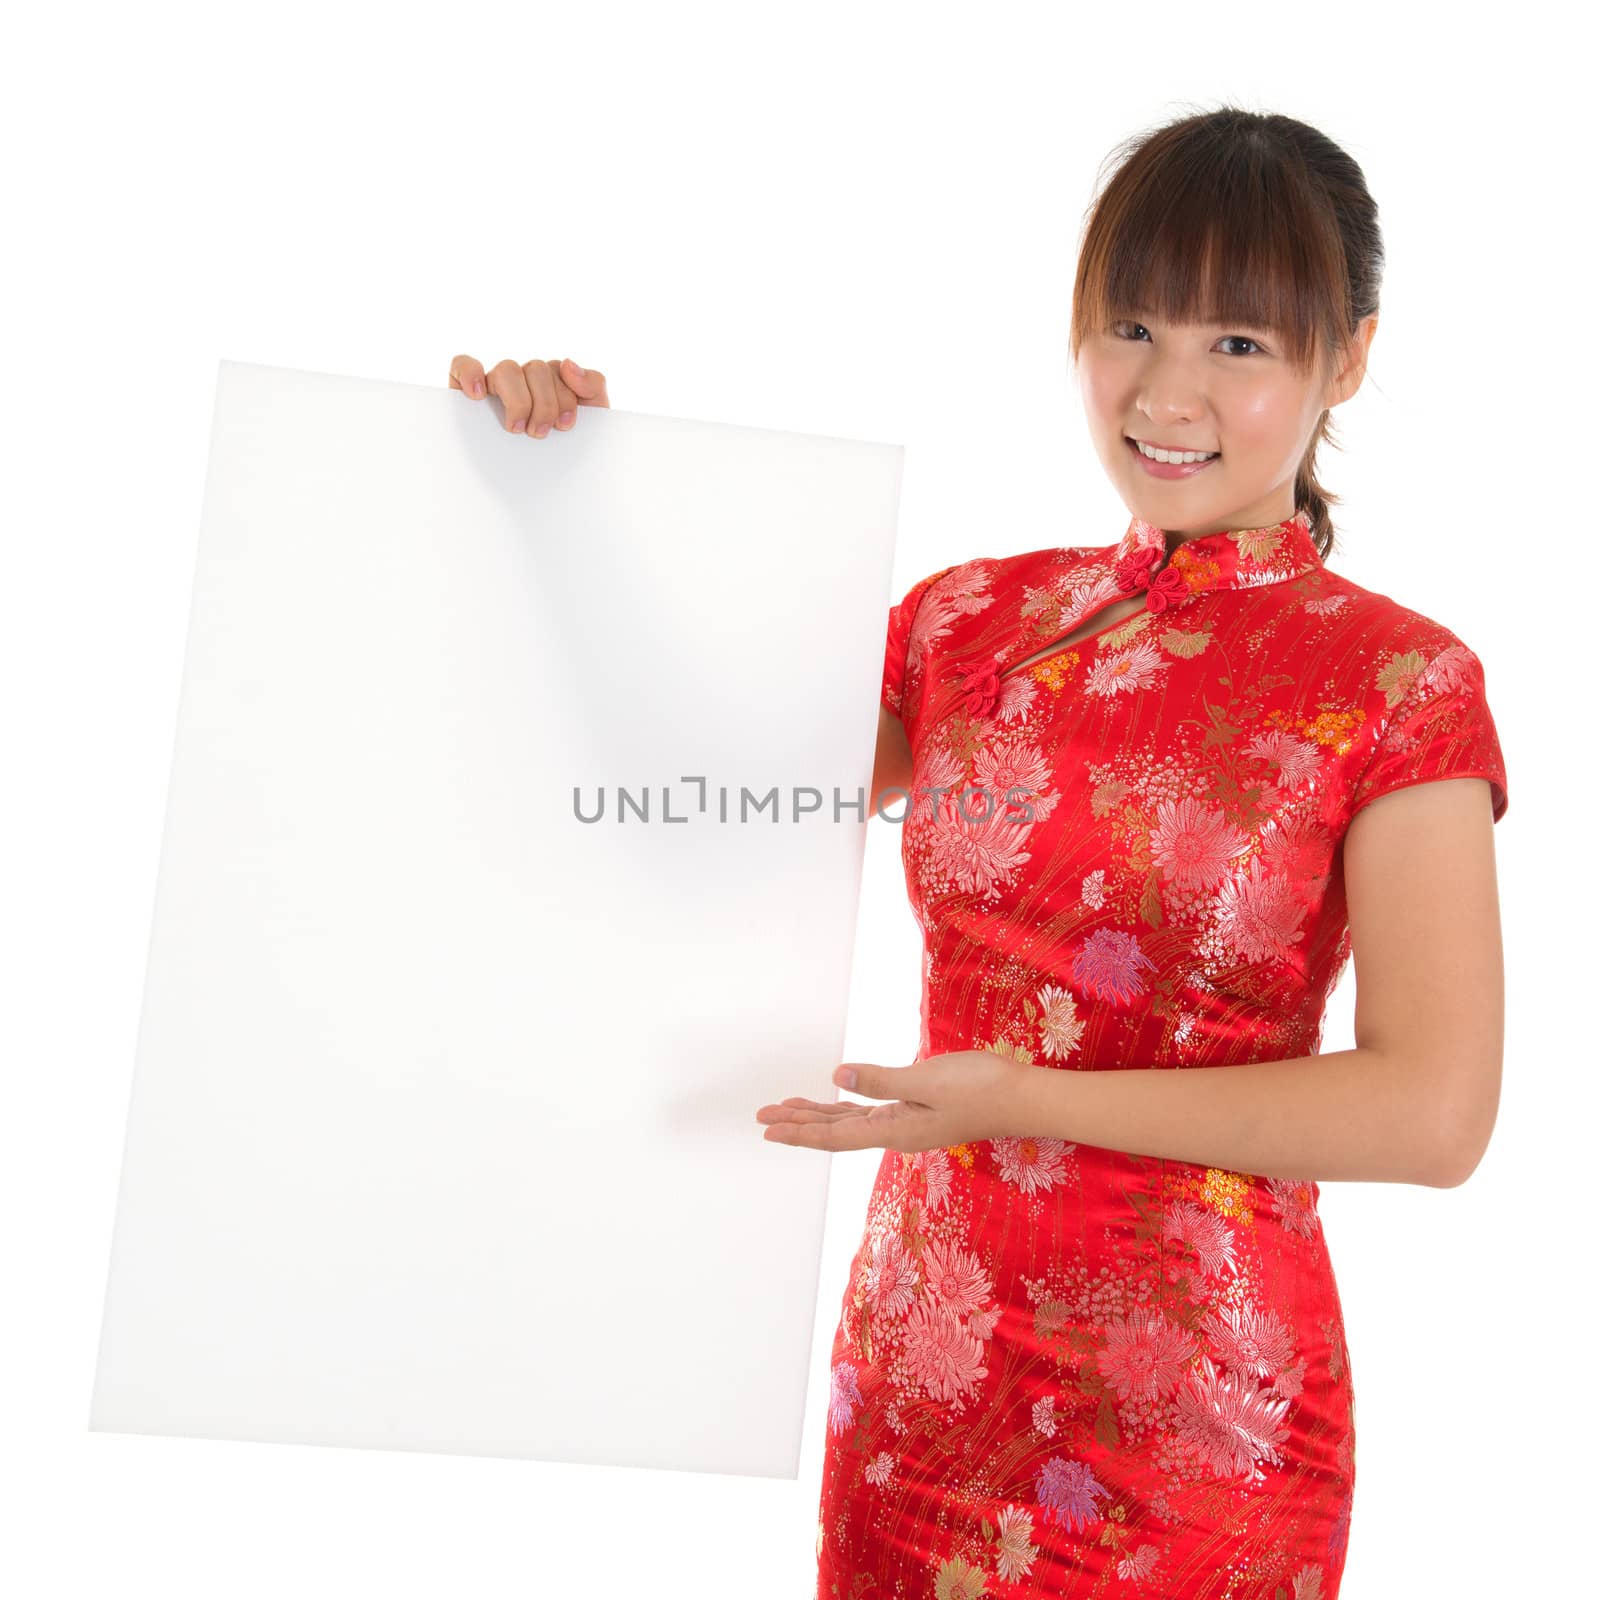 Asian woman with Chinese traditional dress cheongsam or qipao, holding blank white placard. Chinese new year concept, female model isolated on white background.